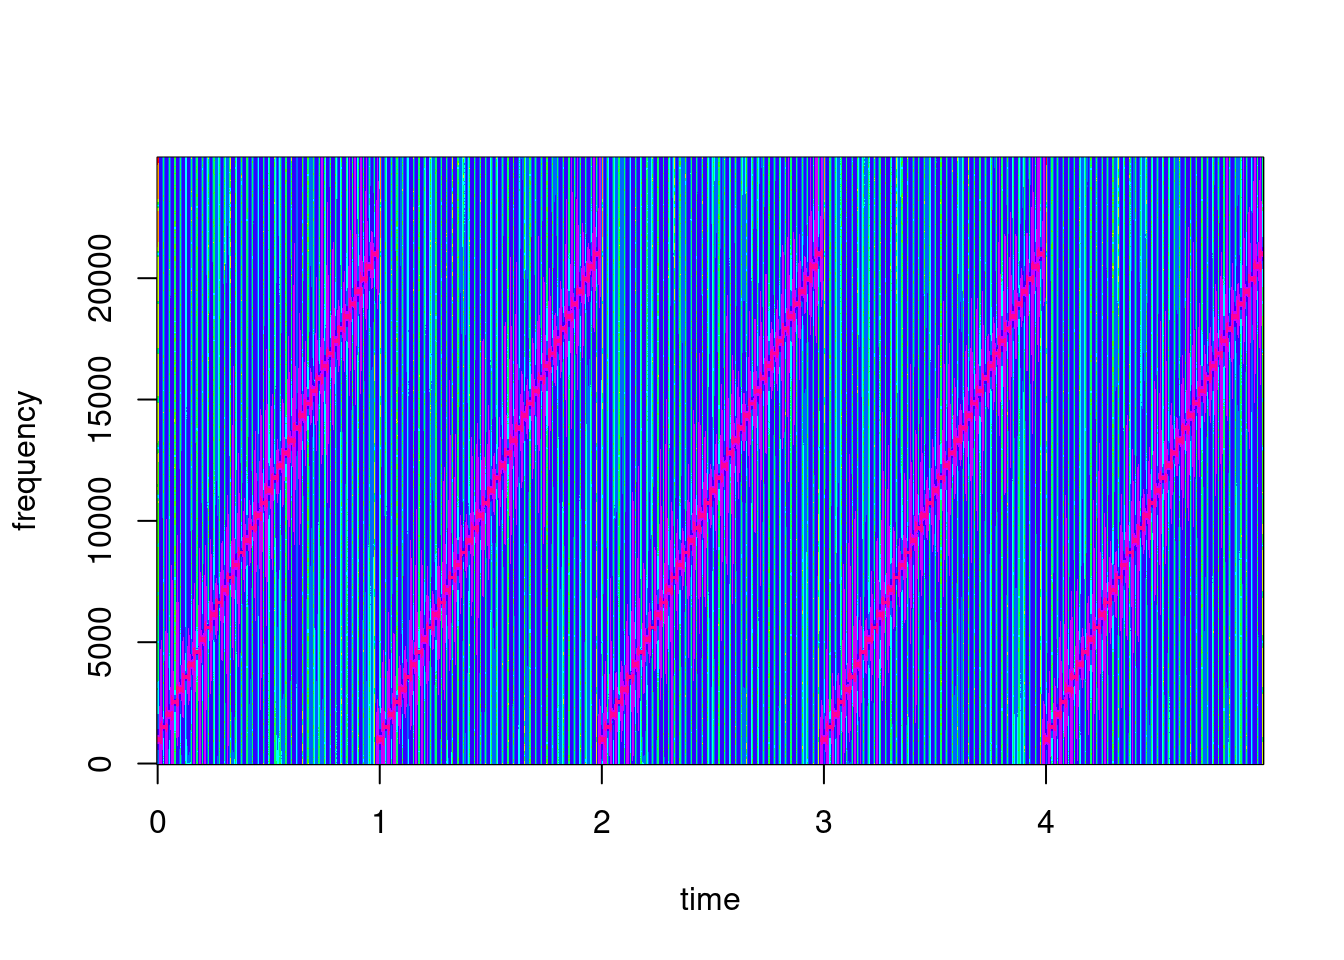 Spectrogram of the generated test file